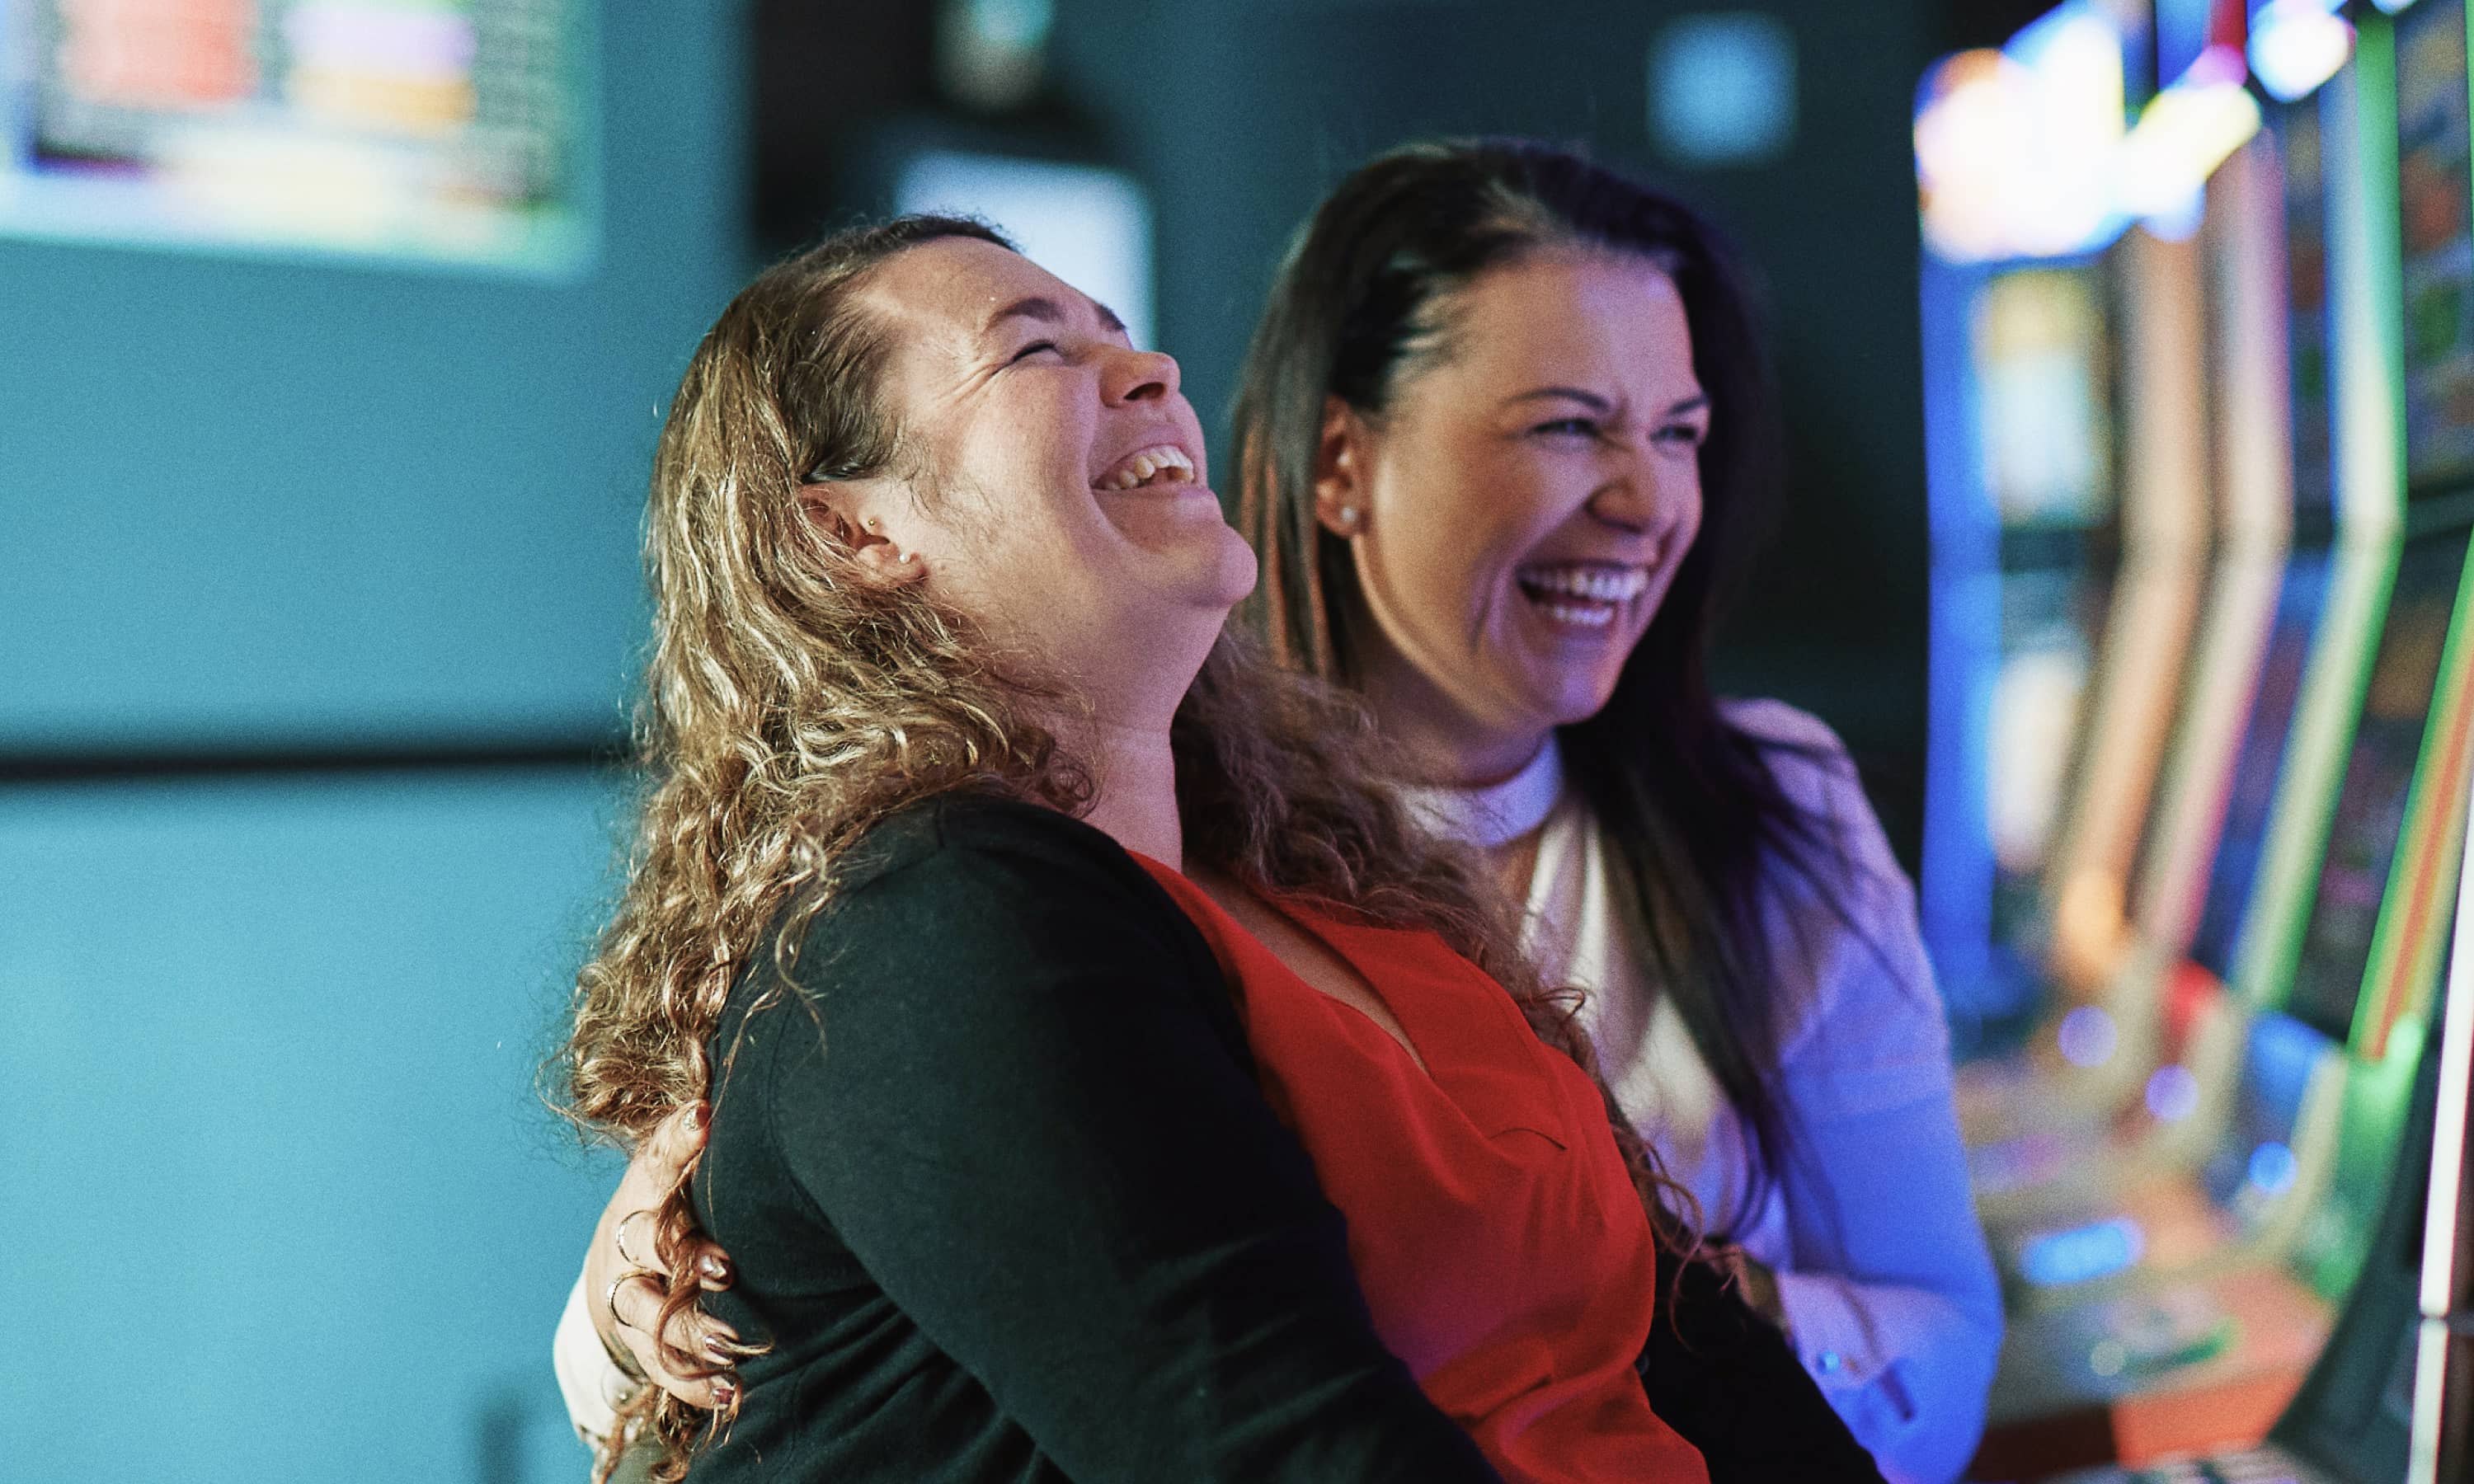 Two women using a pokie machine and laughing together